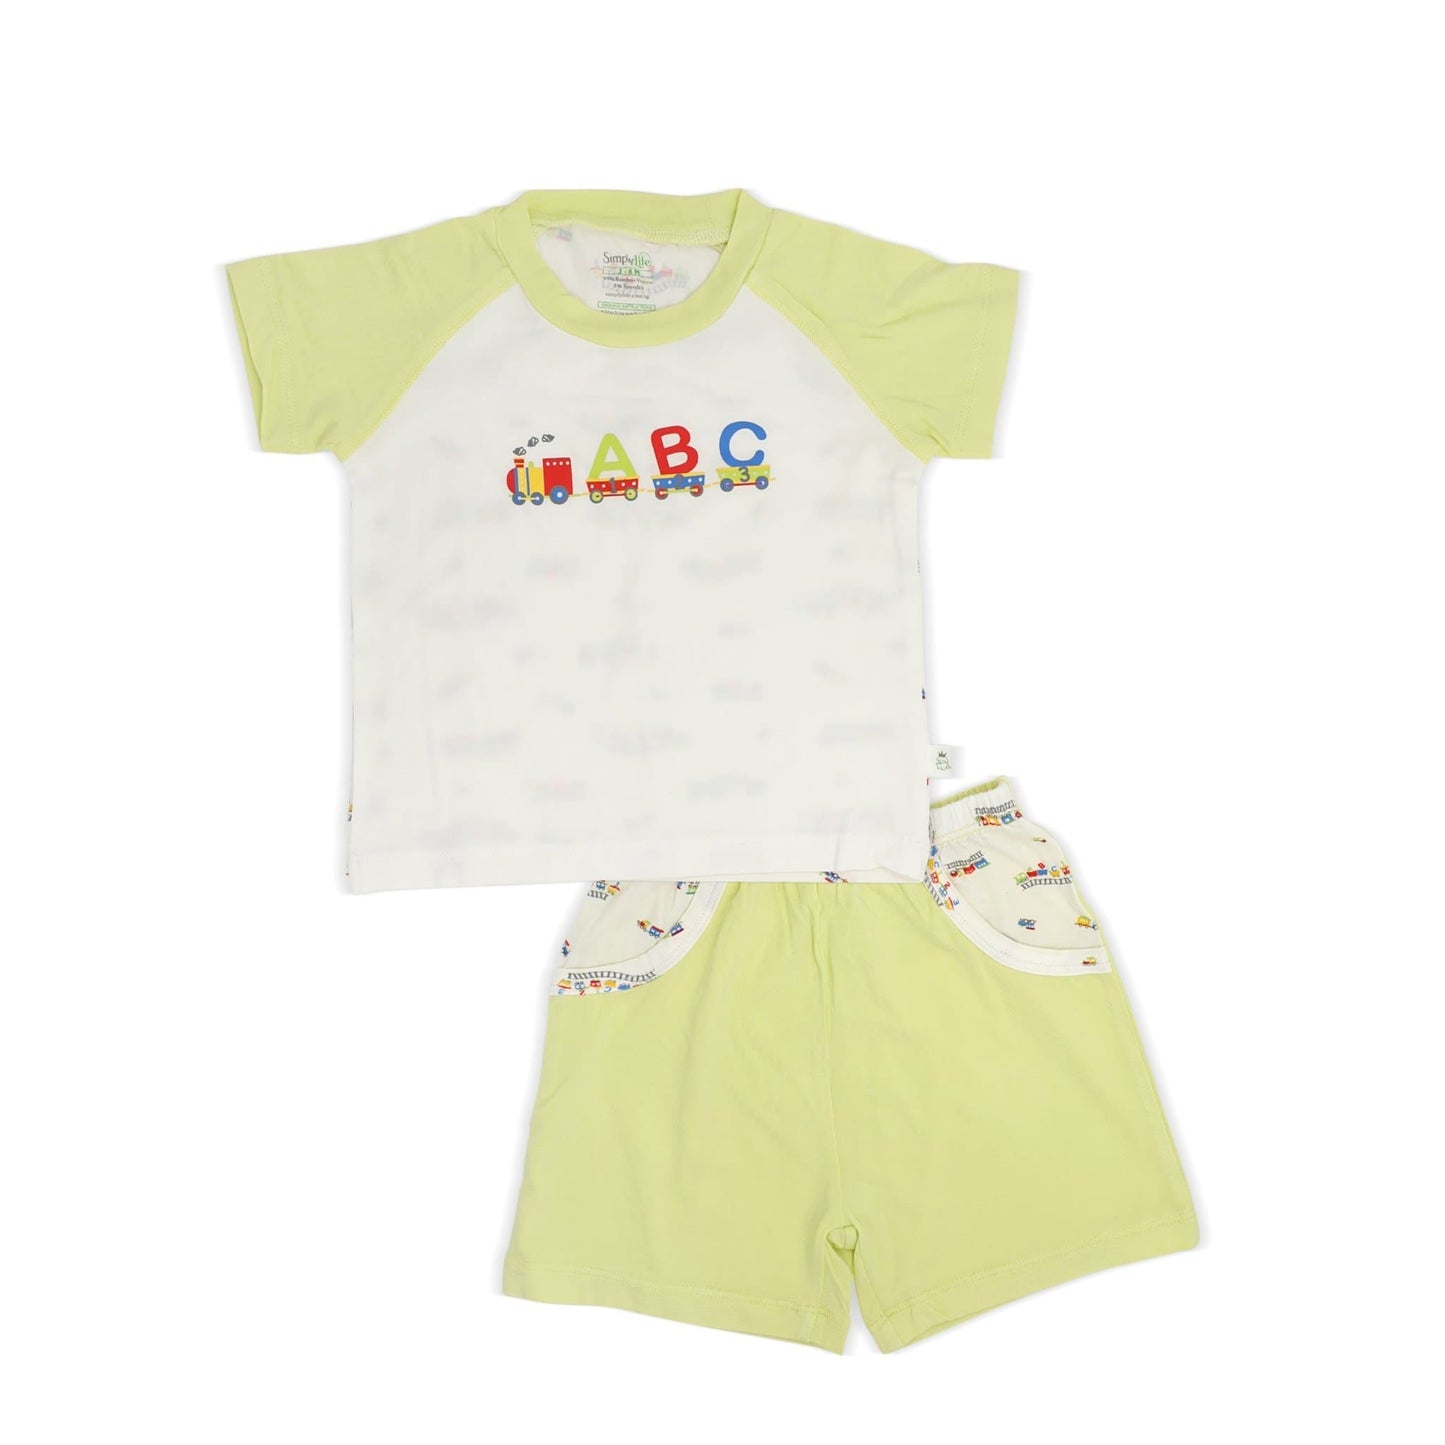 ABC Train - Shorts & Tee Set by simplylifebaby